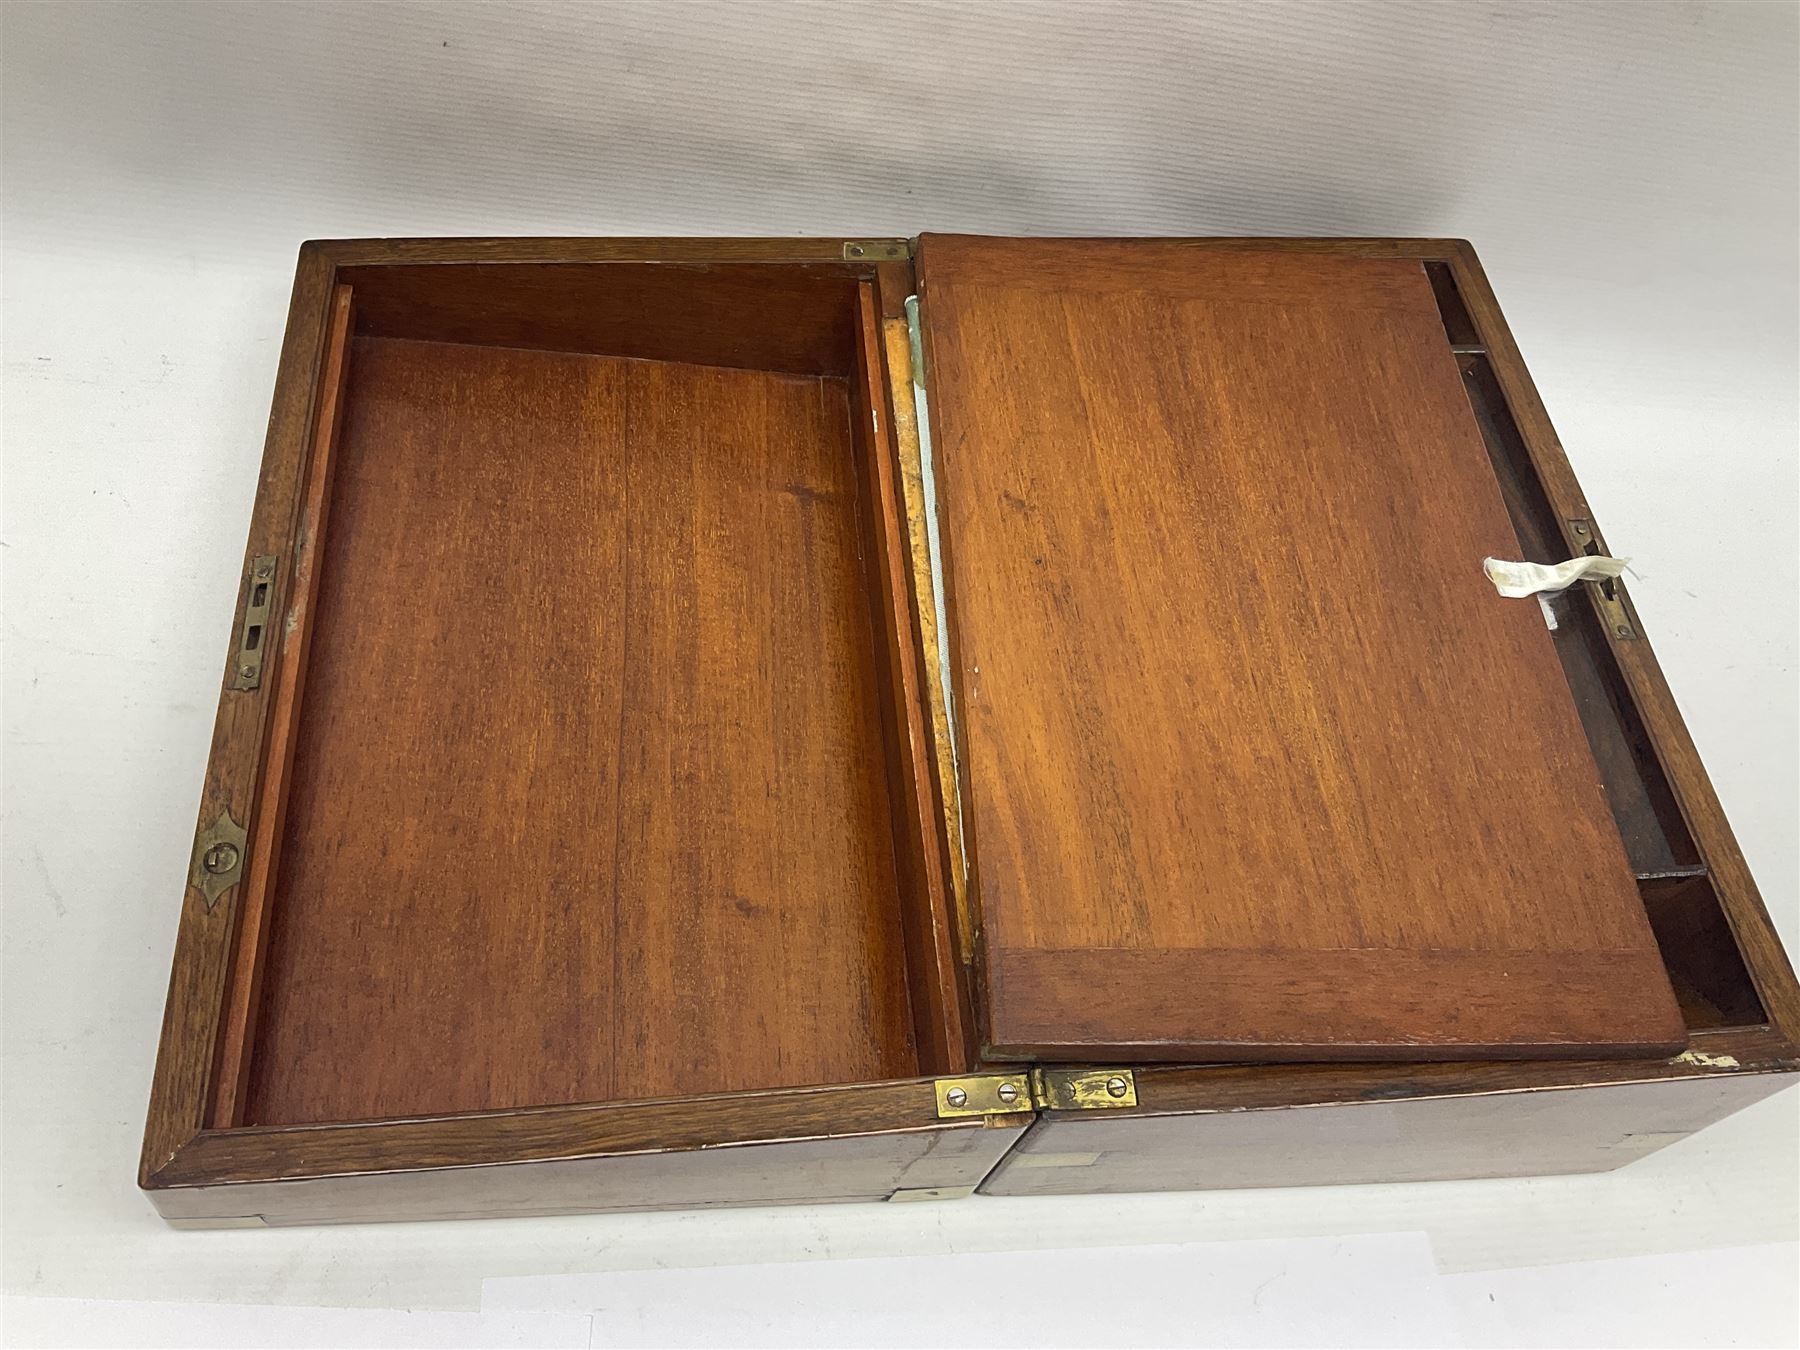 19th century brass bound wooden writing slope - Image 12 of 15